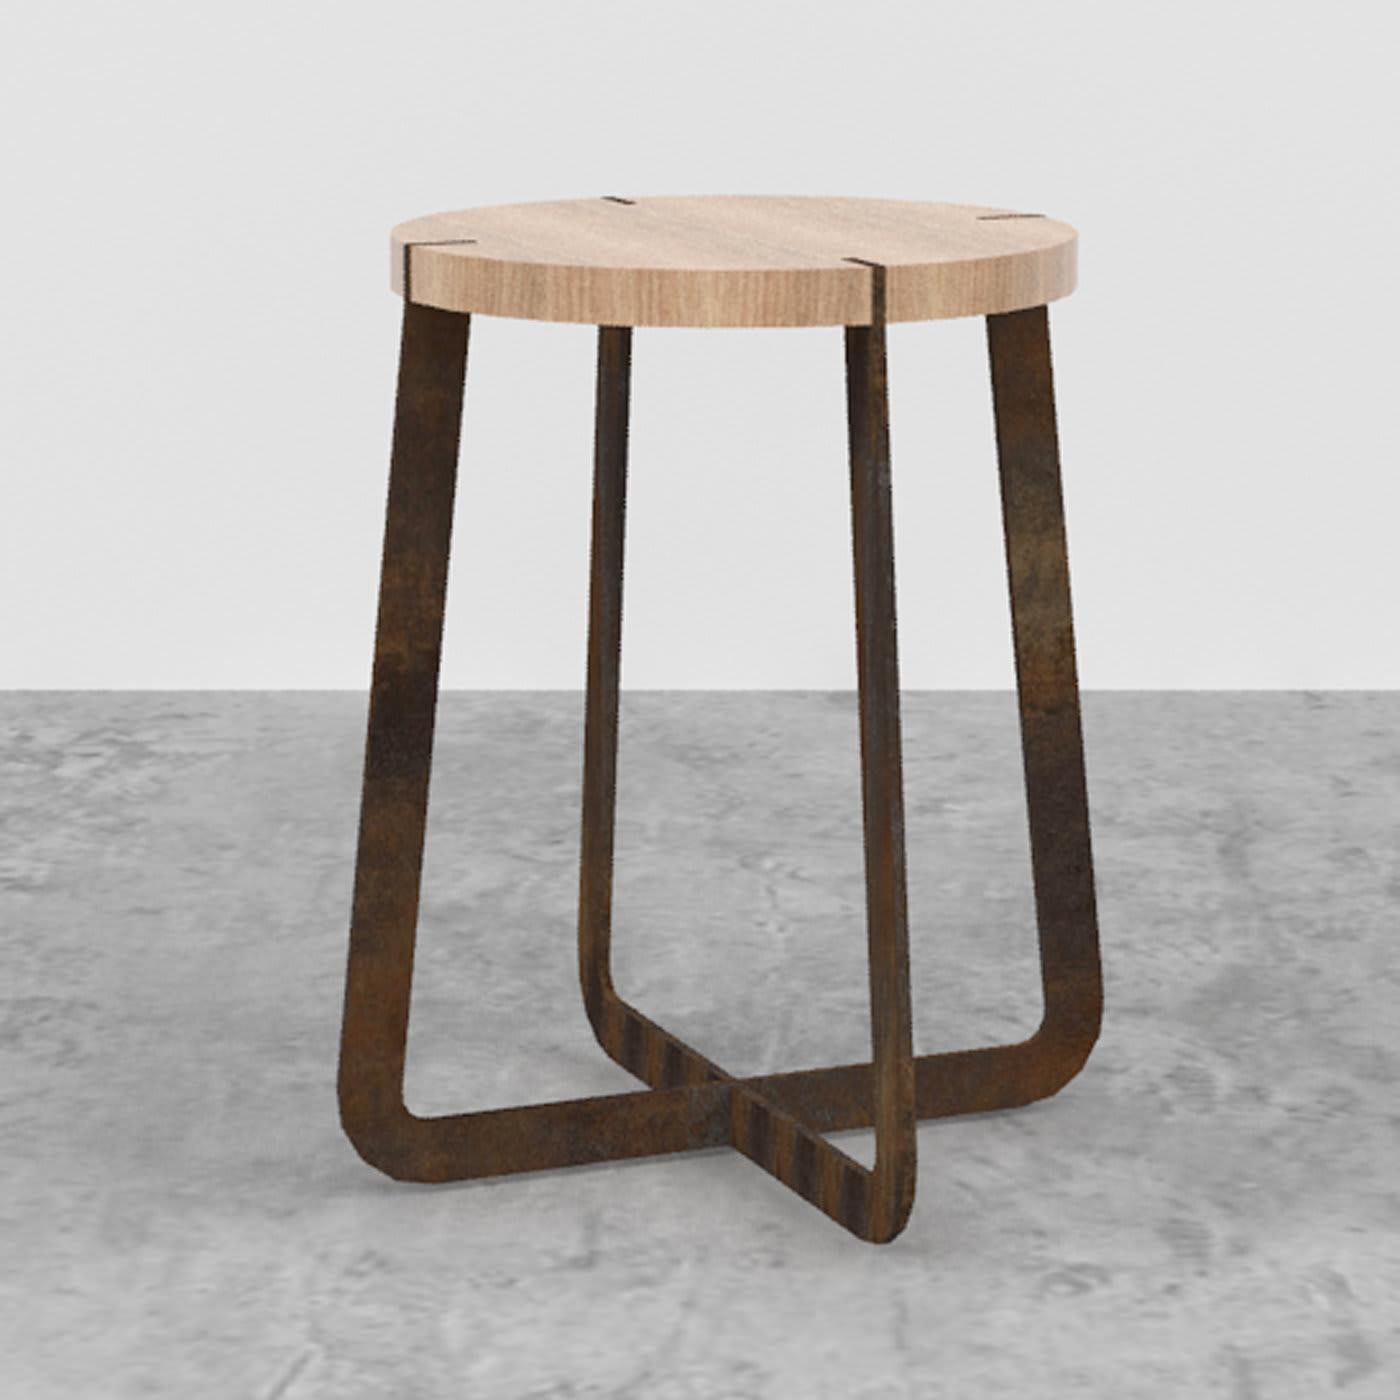 The name of this elegantly crafted stool recalls the territory from where it originates, Puglia, one of the most fascinating places in the Mediterranean. The painted steel structure is comprised of two crossing elements, supporting a round seat in